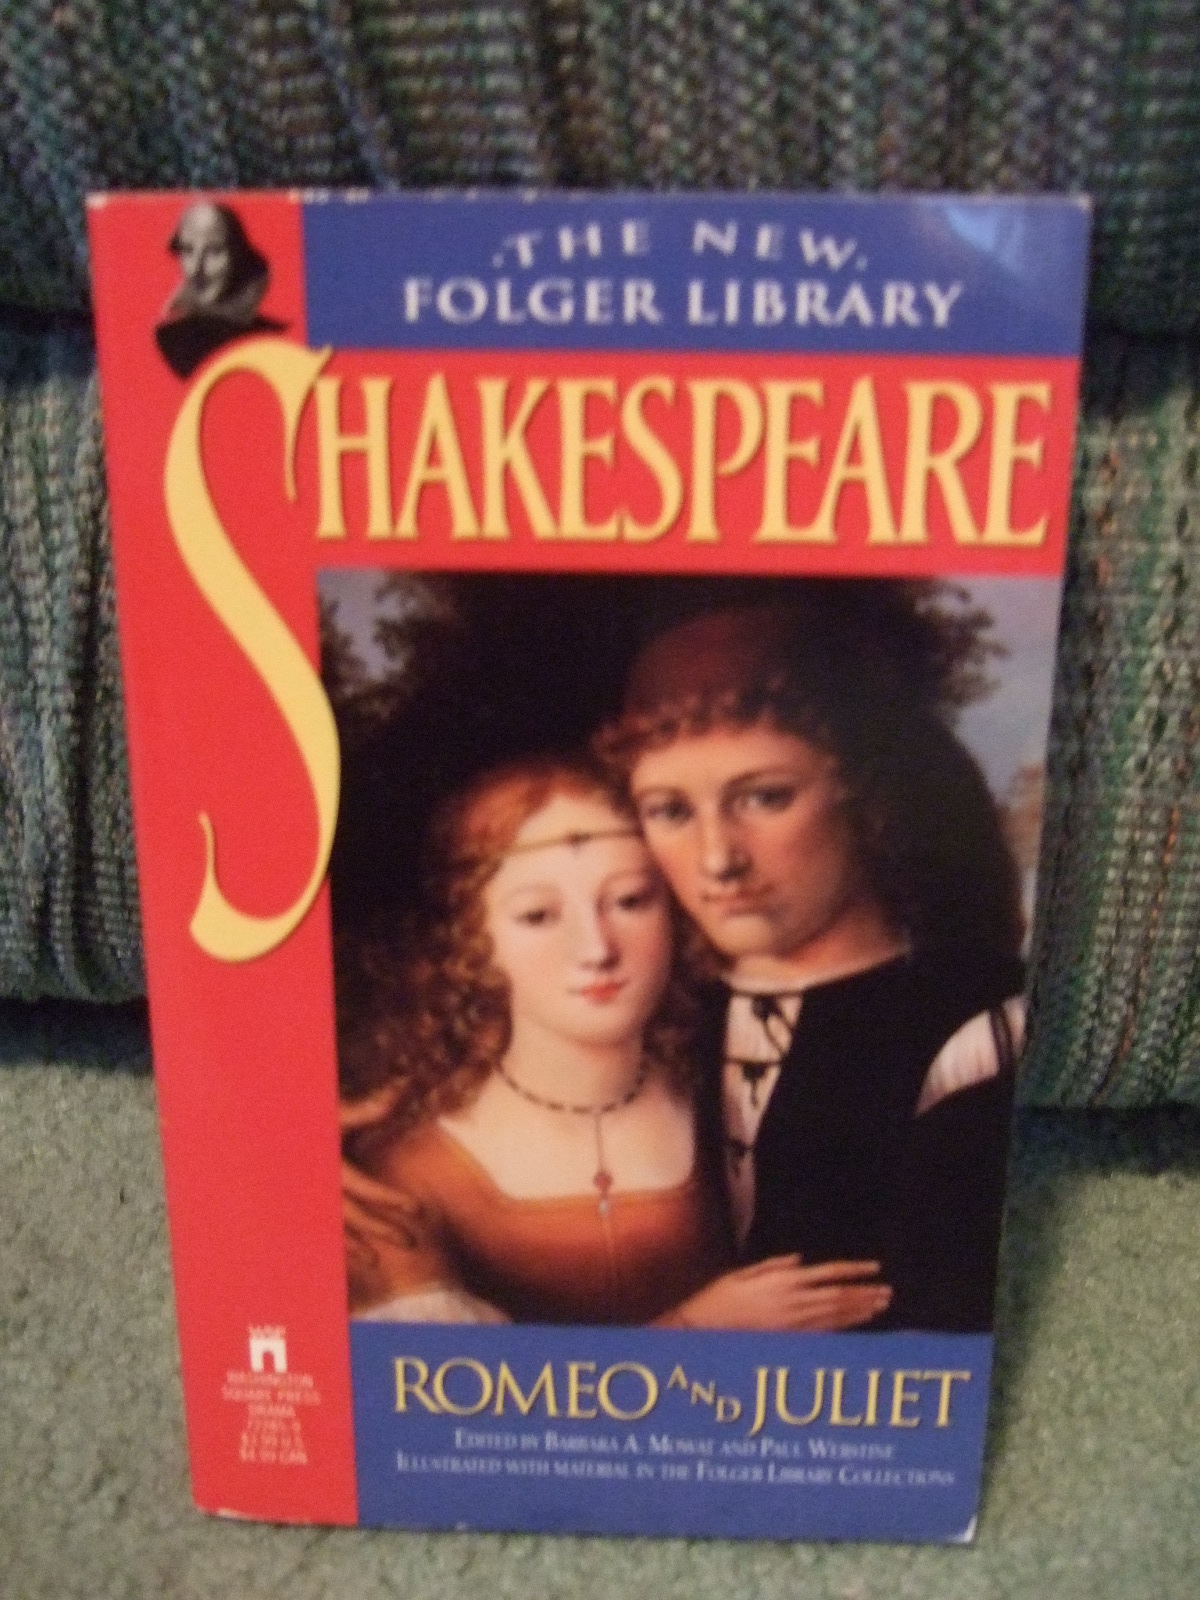 Spiral Staircase Books: William Shakespeare Short Story Contest